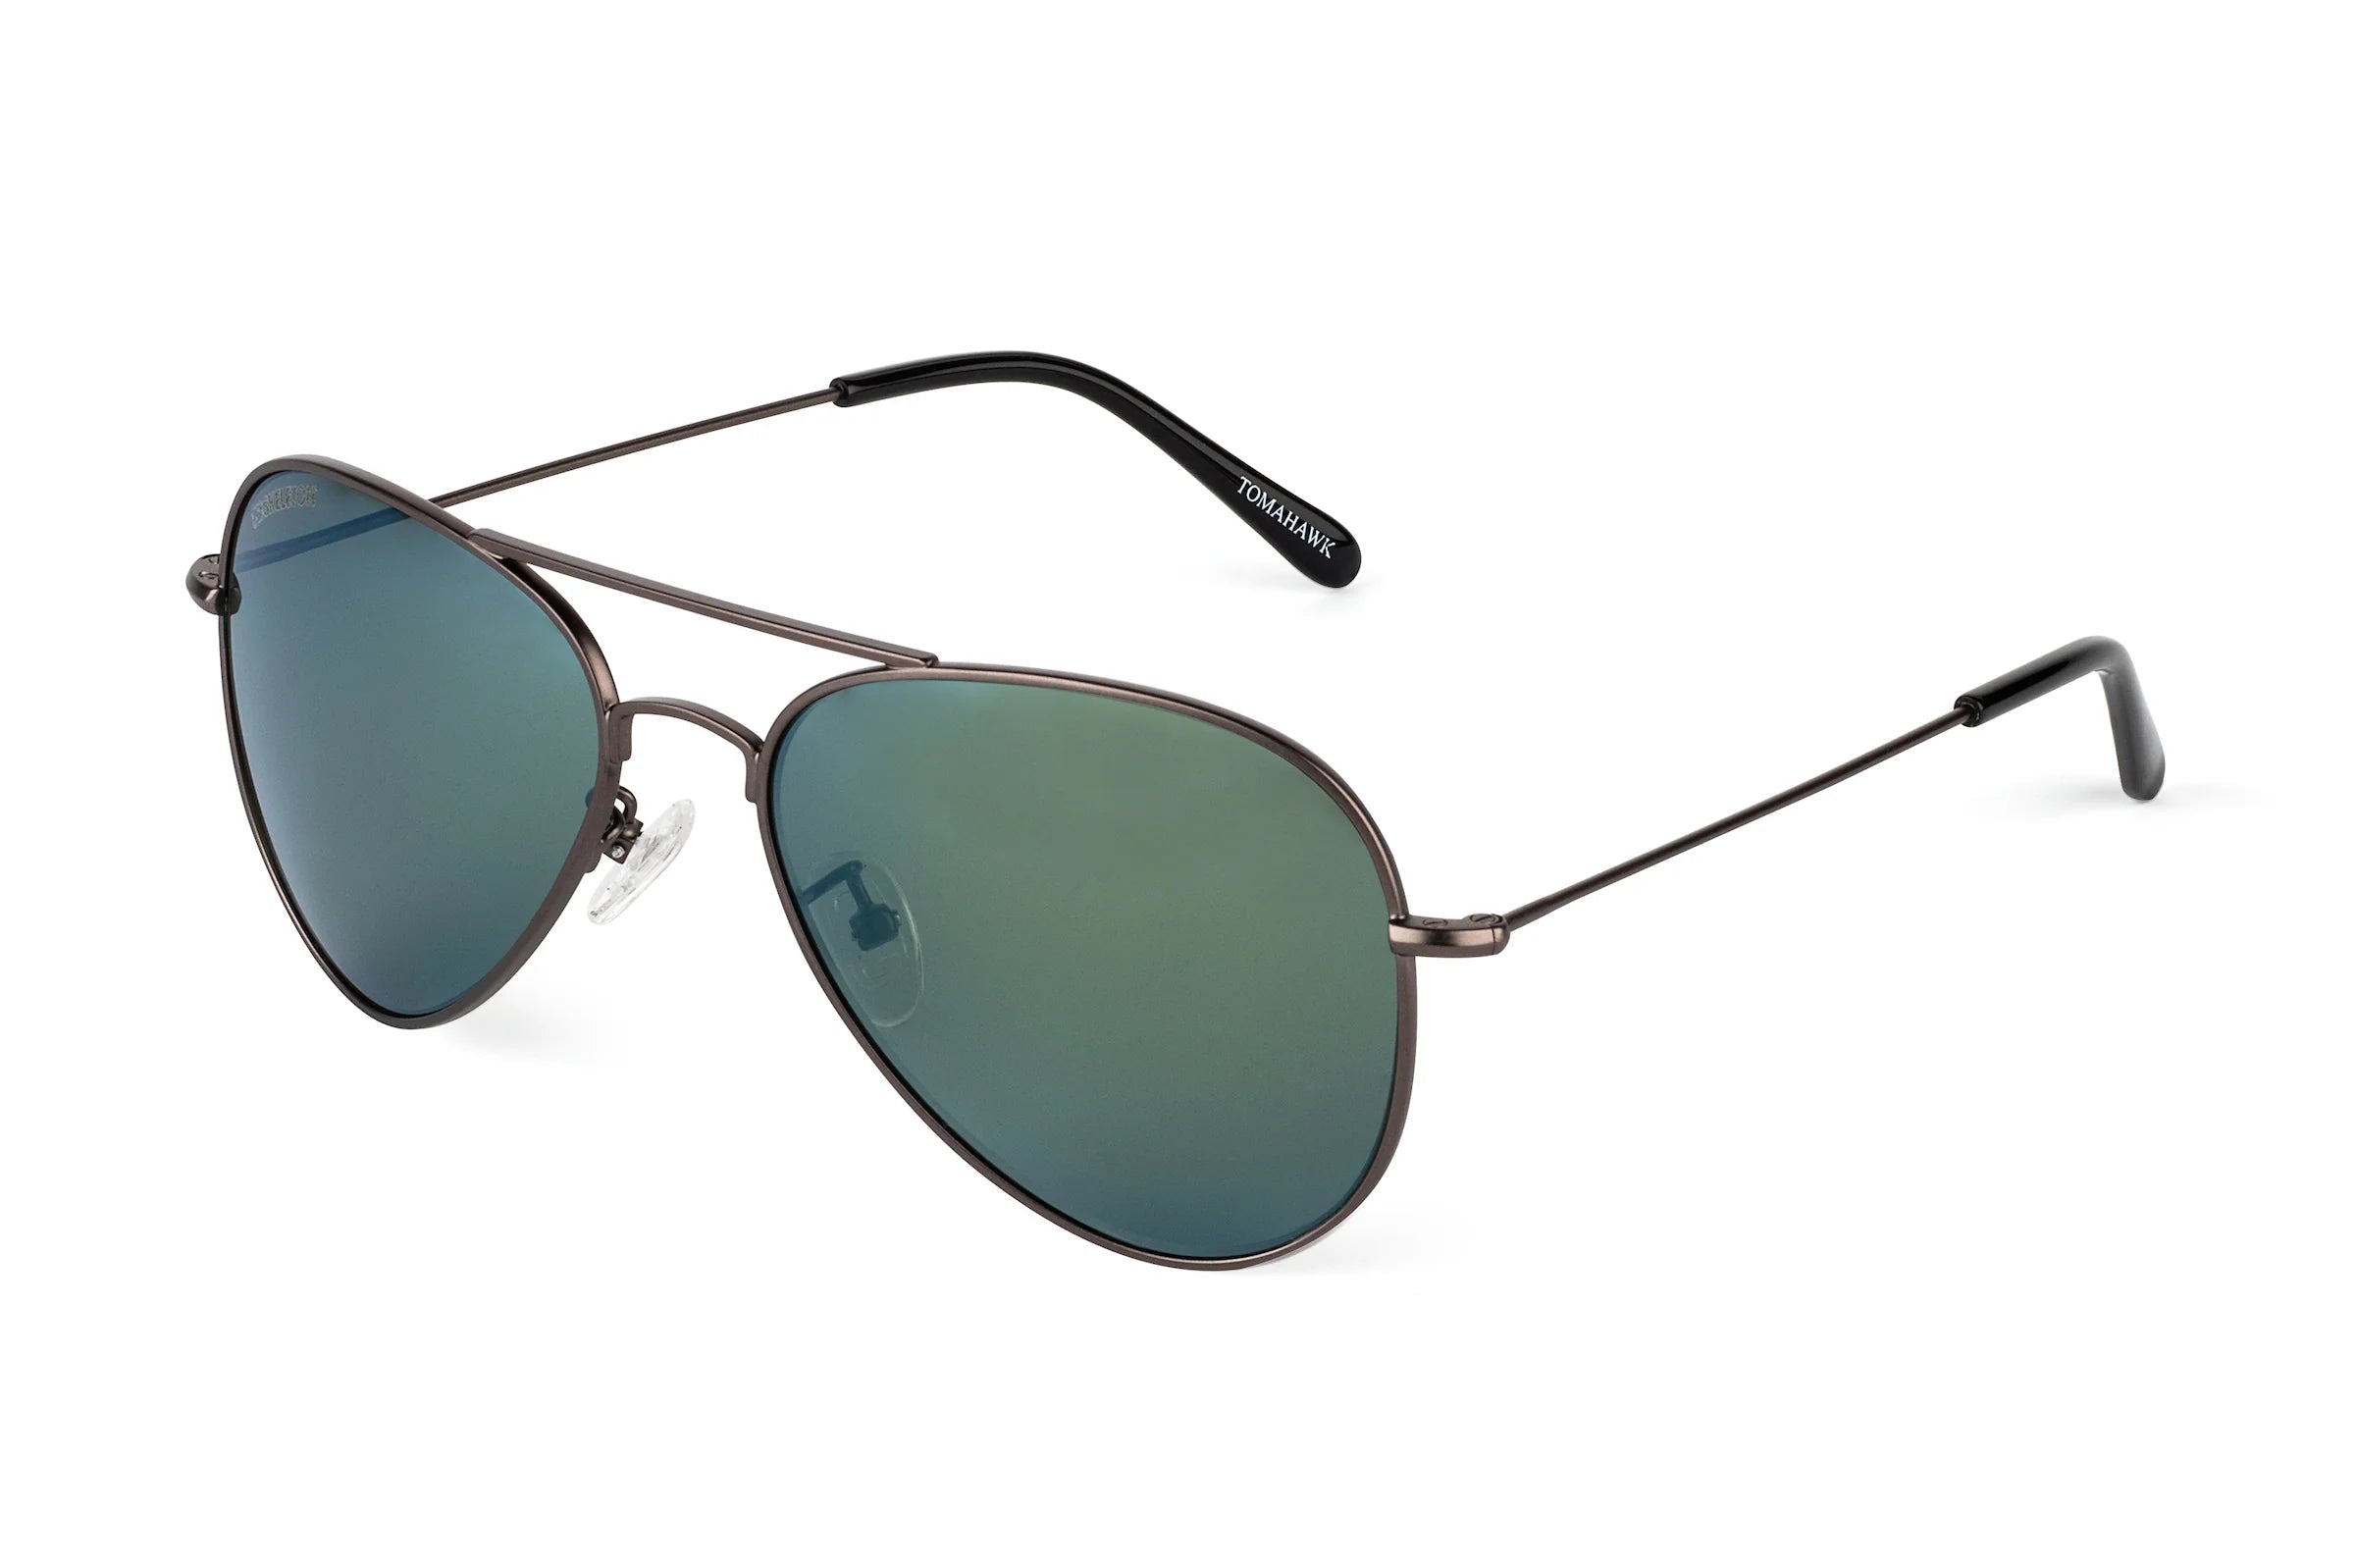 Aviator style sunglasses with gunmetal frames and green lenses